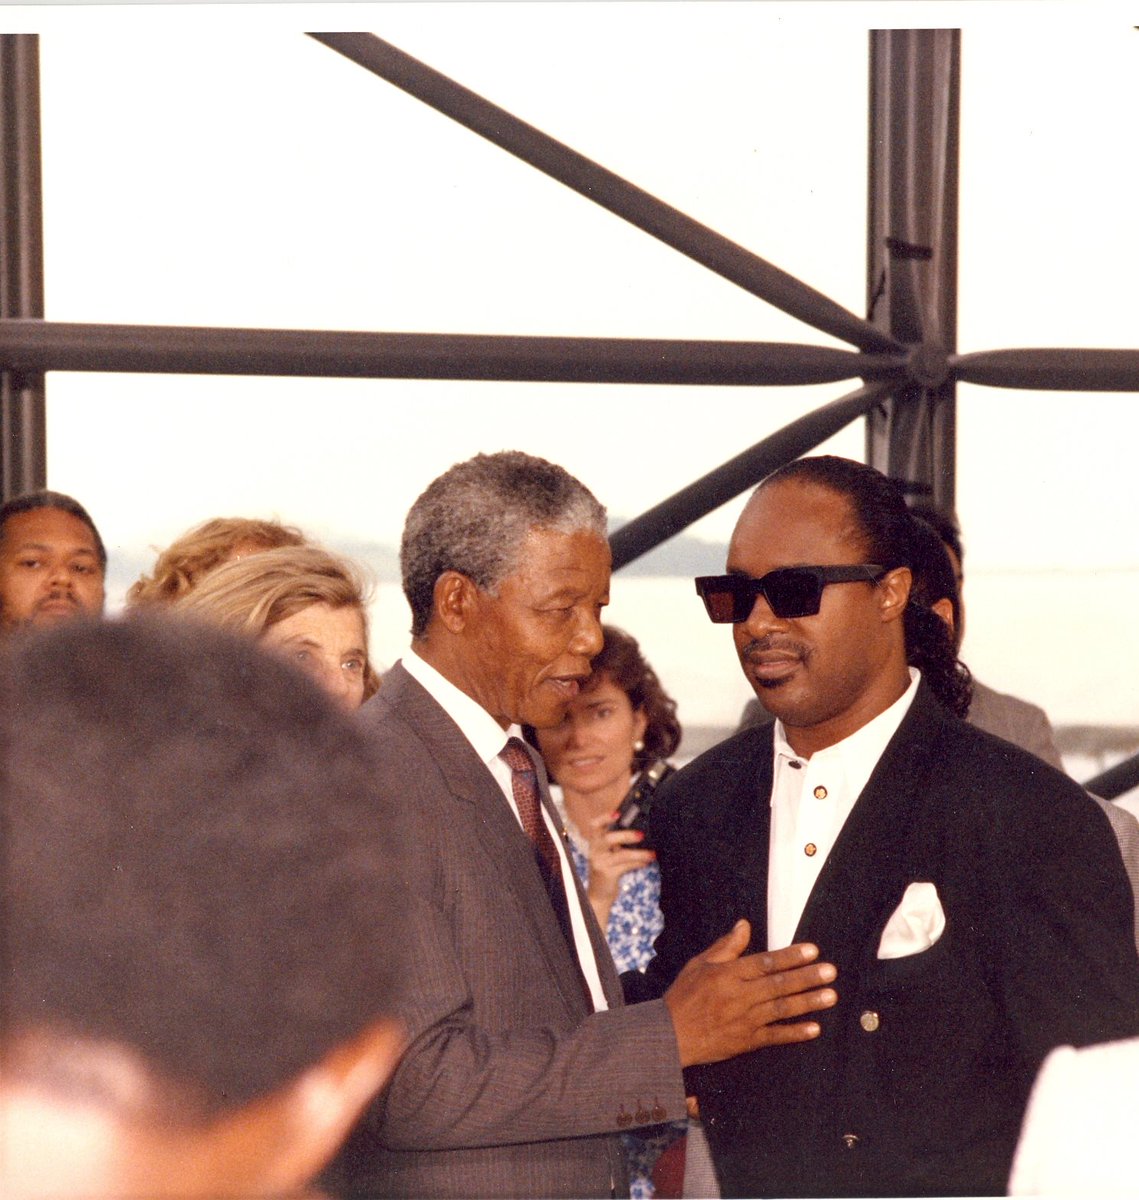 Wishing a happy birthday to Stevie Wonder, who was born #otd on May 13, 1950! In 1990, Wonder visited the JFK Library with Nelson Mandela during the South African leader’s trip to Boston.